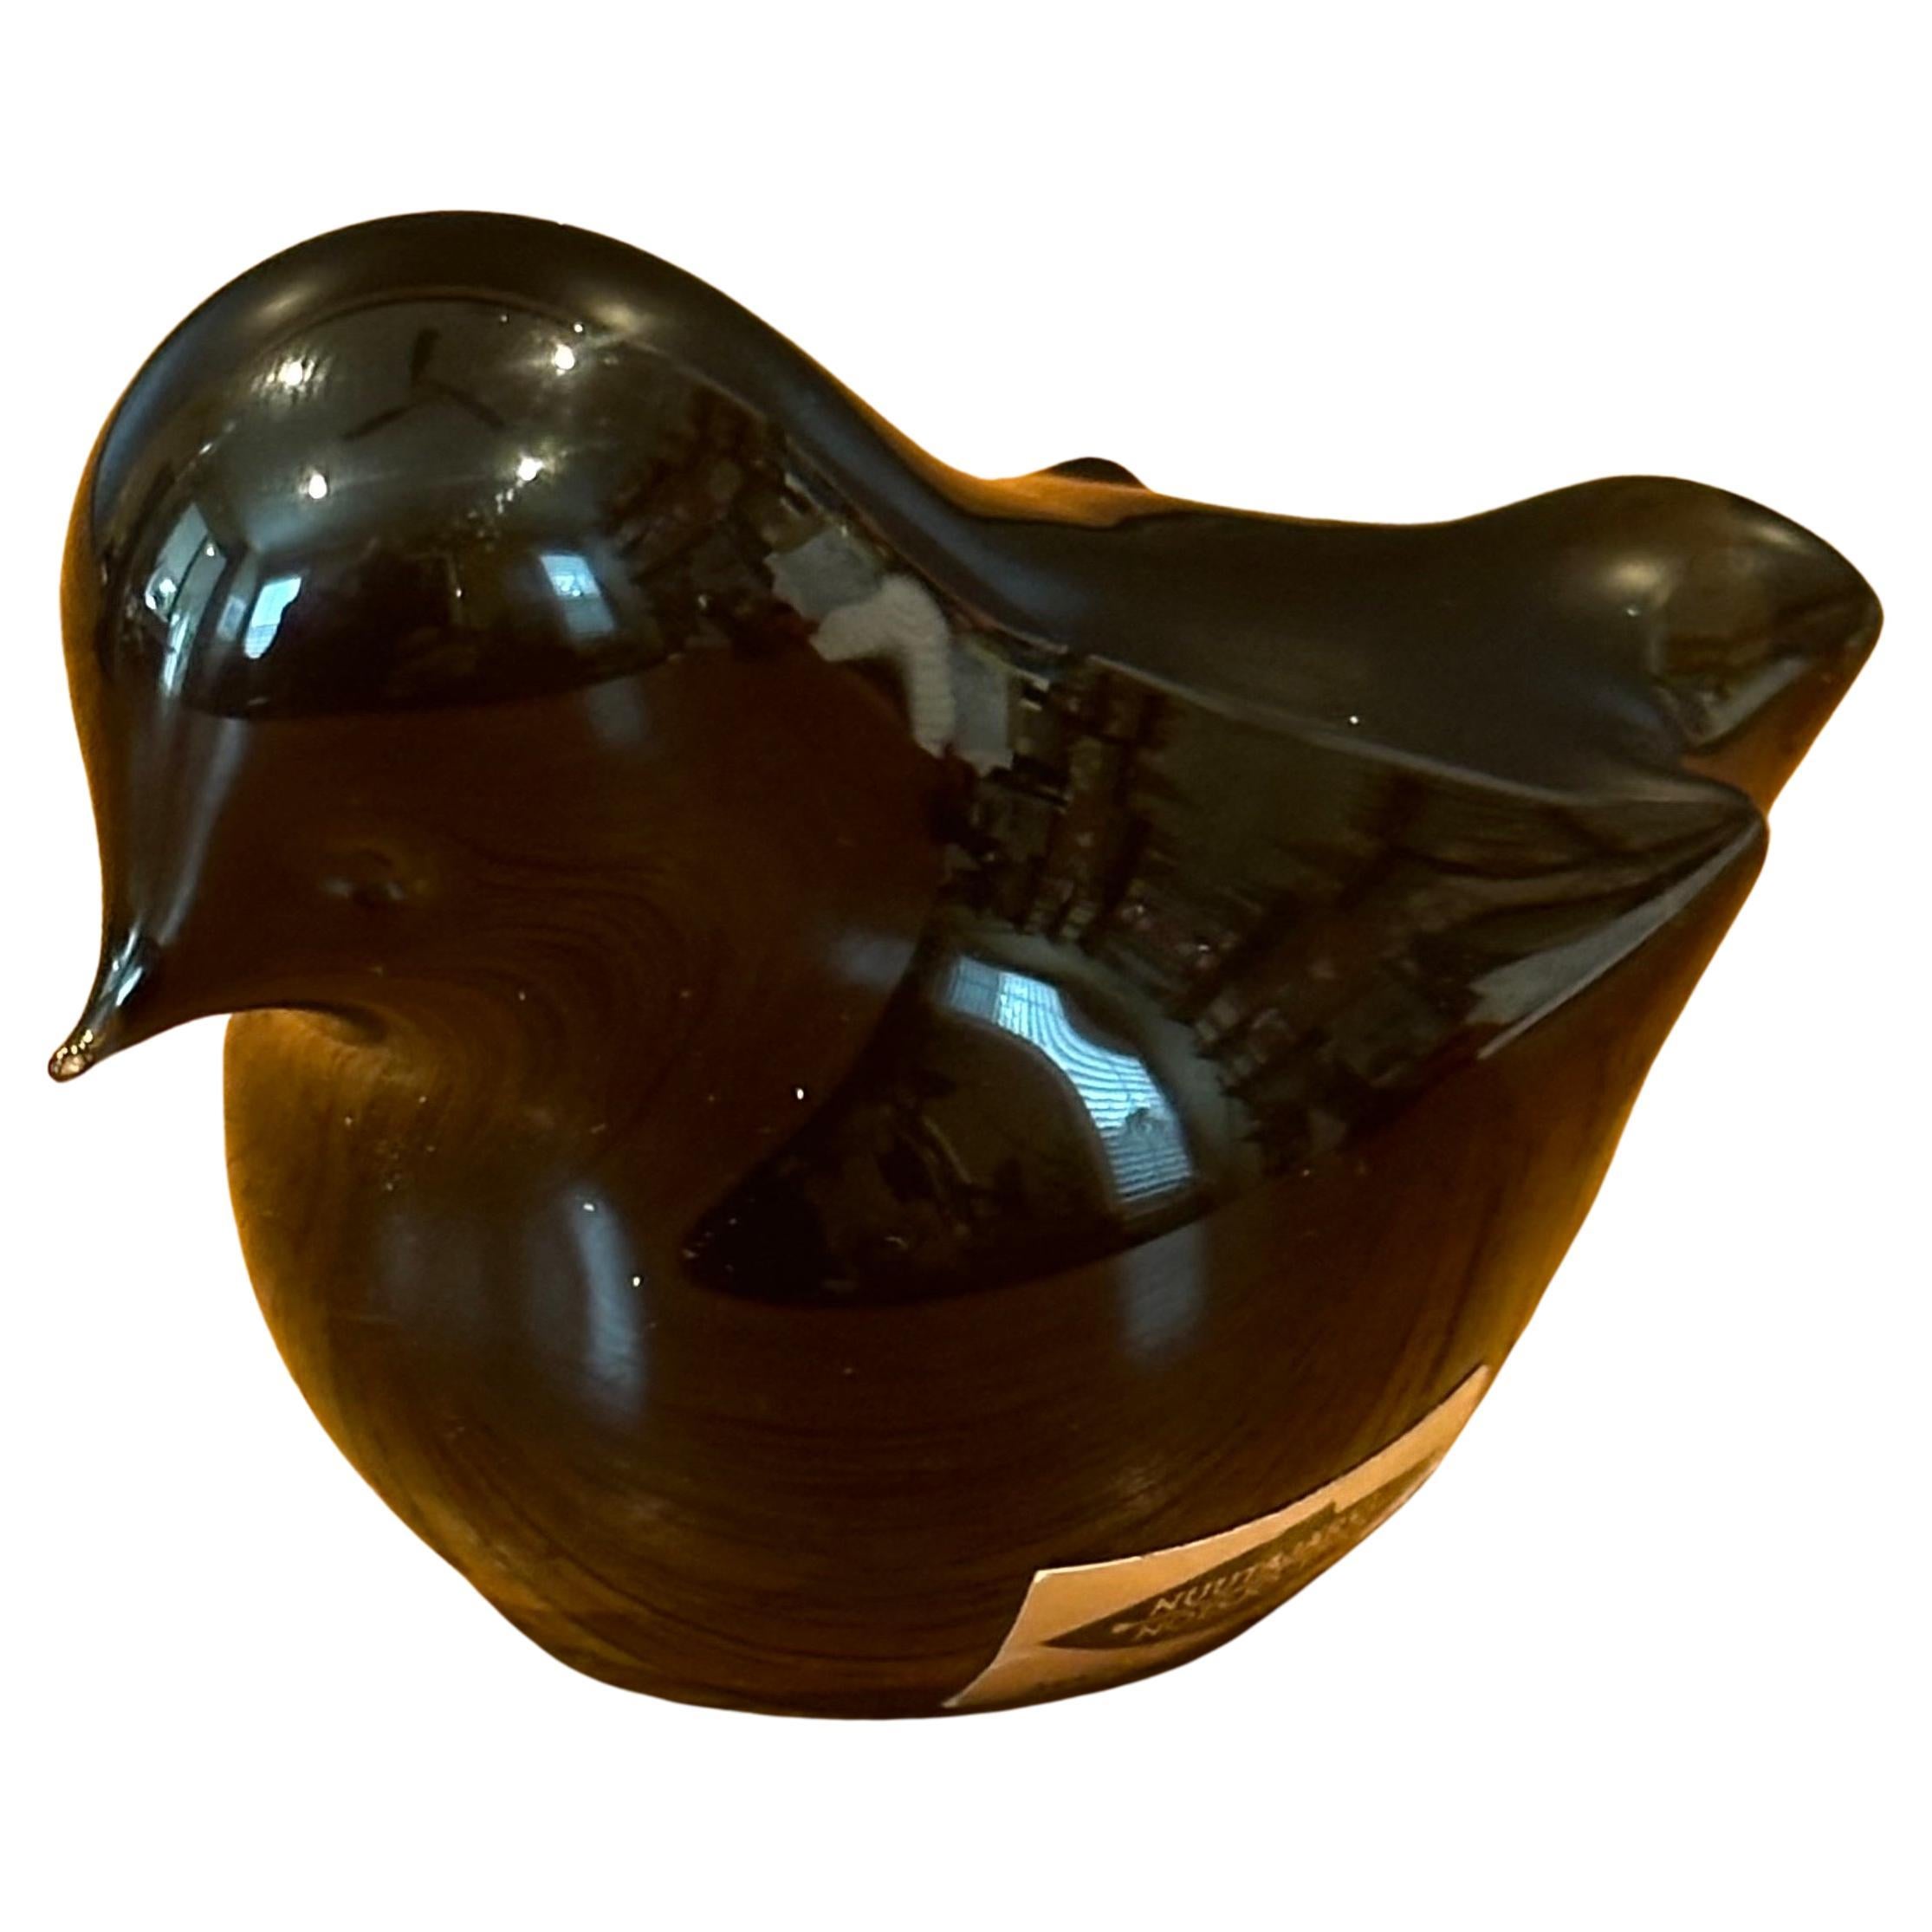 Gorgeous small art glass bird paperweight / sculpture by Nuutajarvi of Finland, circa 1980s. The sculpture is mouth blown and is in great vintage condition with no chips or cracks. The piece measures 3